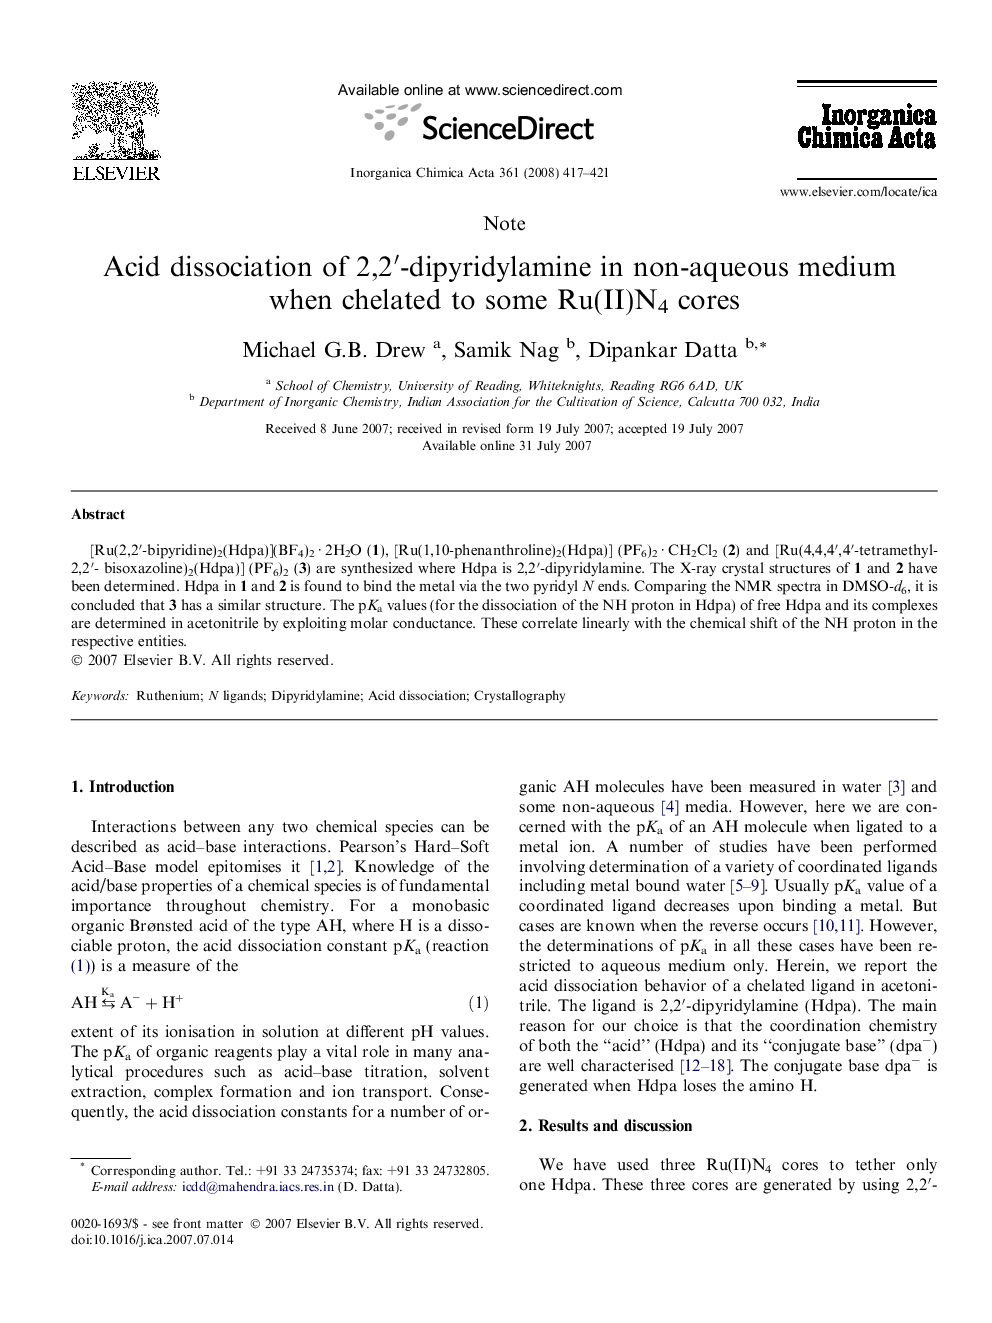 Acid dissociation of 2,2′-dipyridylamine in non-aqueous medium when chelated to some Ru(II)N4 cores